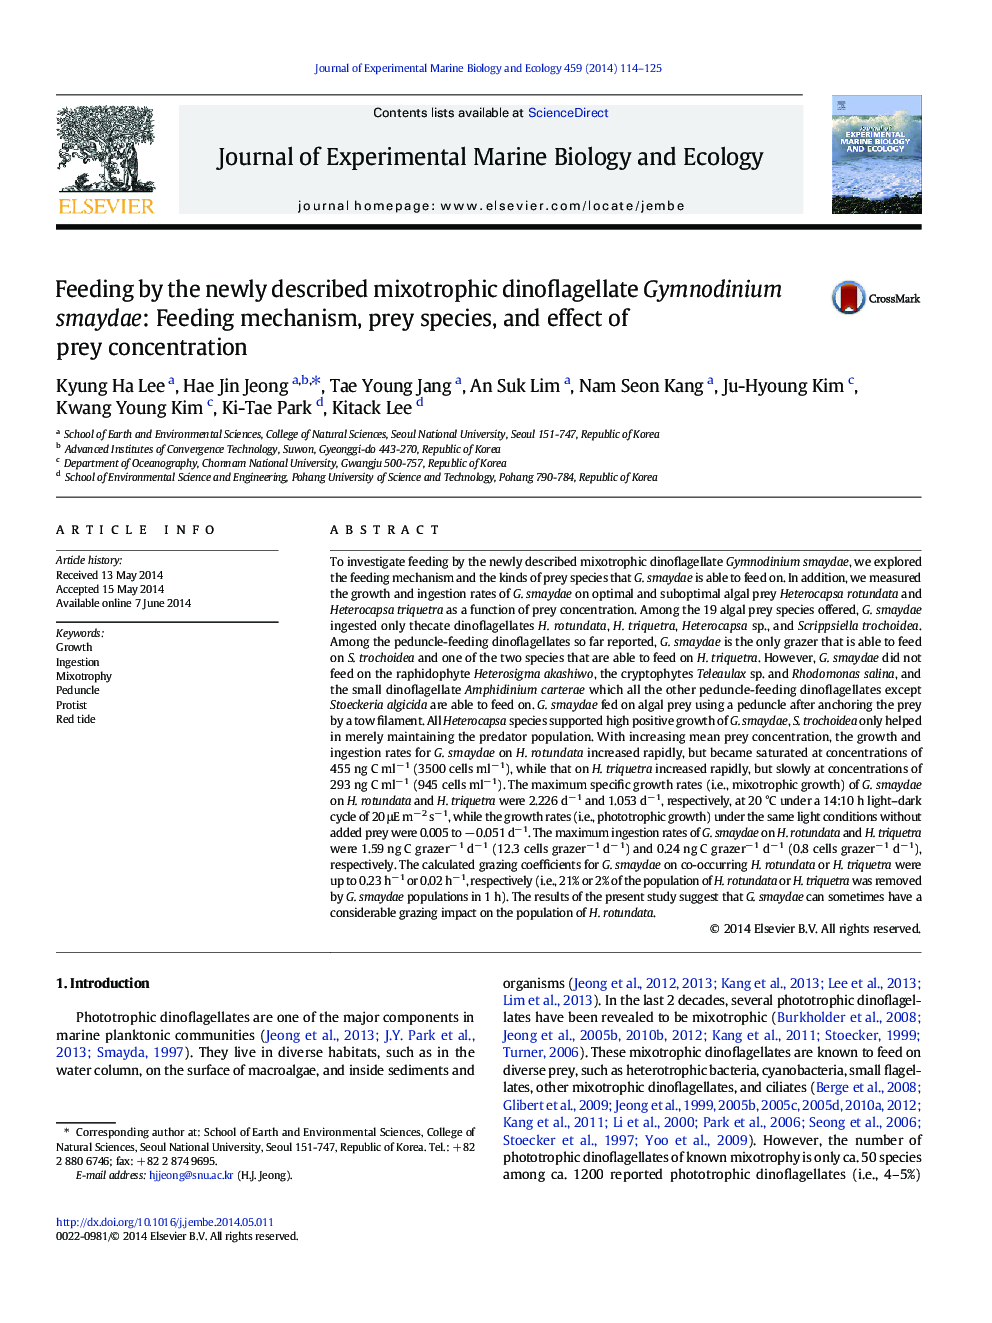 Feeding by the newly described mixotrophic dinoflagellate Gymnodinium smaydae: Feeding mechanism, prey species, and effect of prey concentration